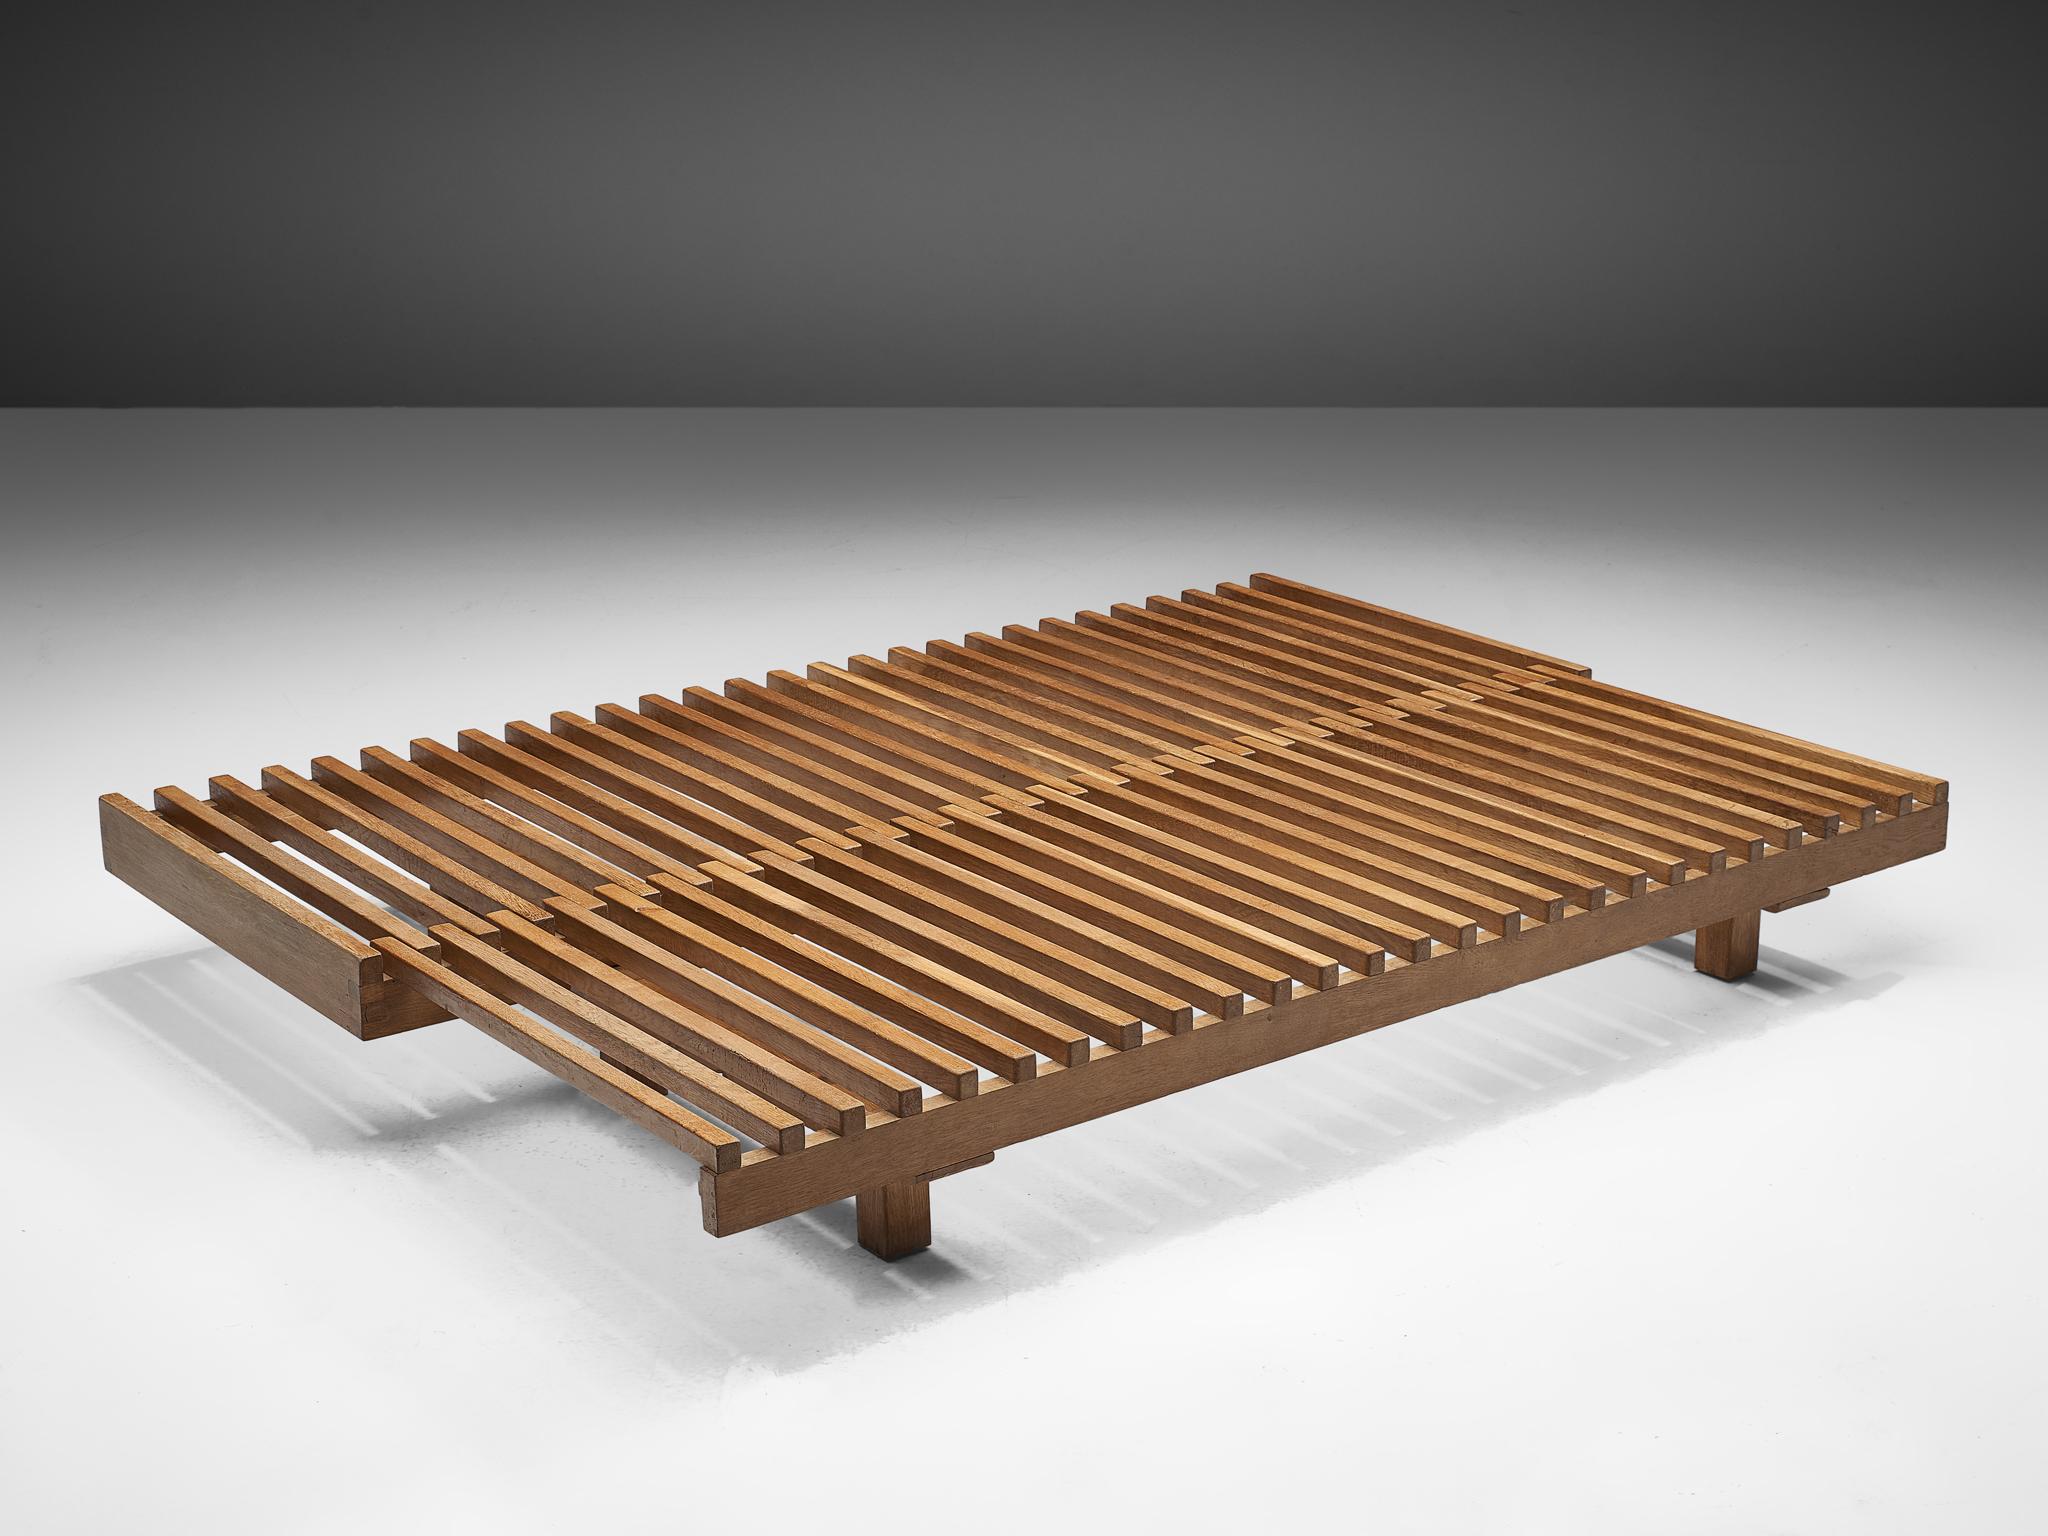 Pierre Chapo, L07 extendable daybed, oak, France, 1963.

This exquisite slidable wood structure, can create space for one or two people to lay on it. This piece impeccable in its technique, as it can be modified to the desired function without any